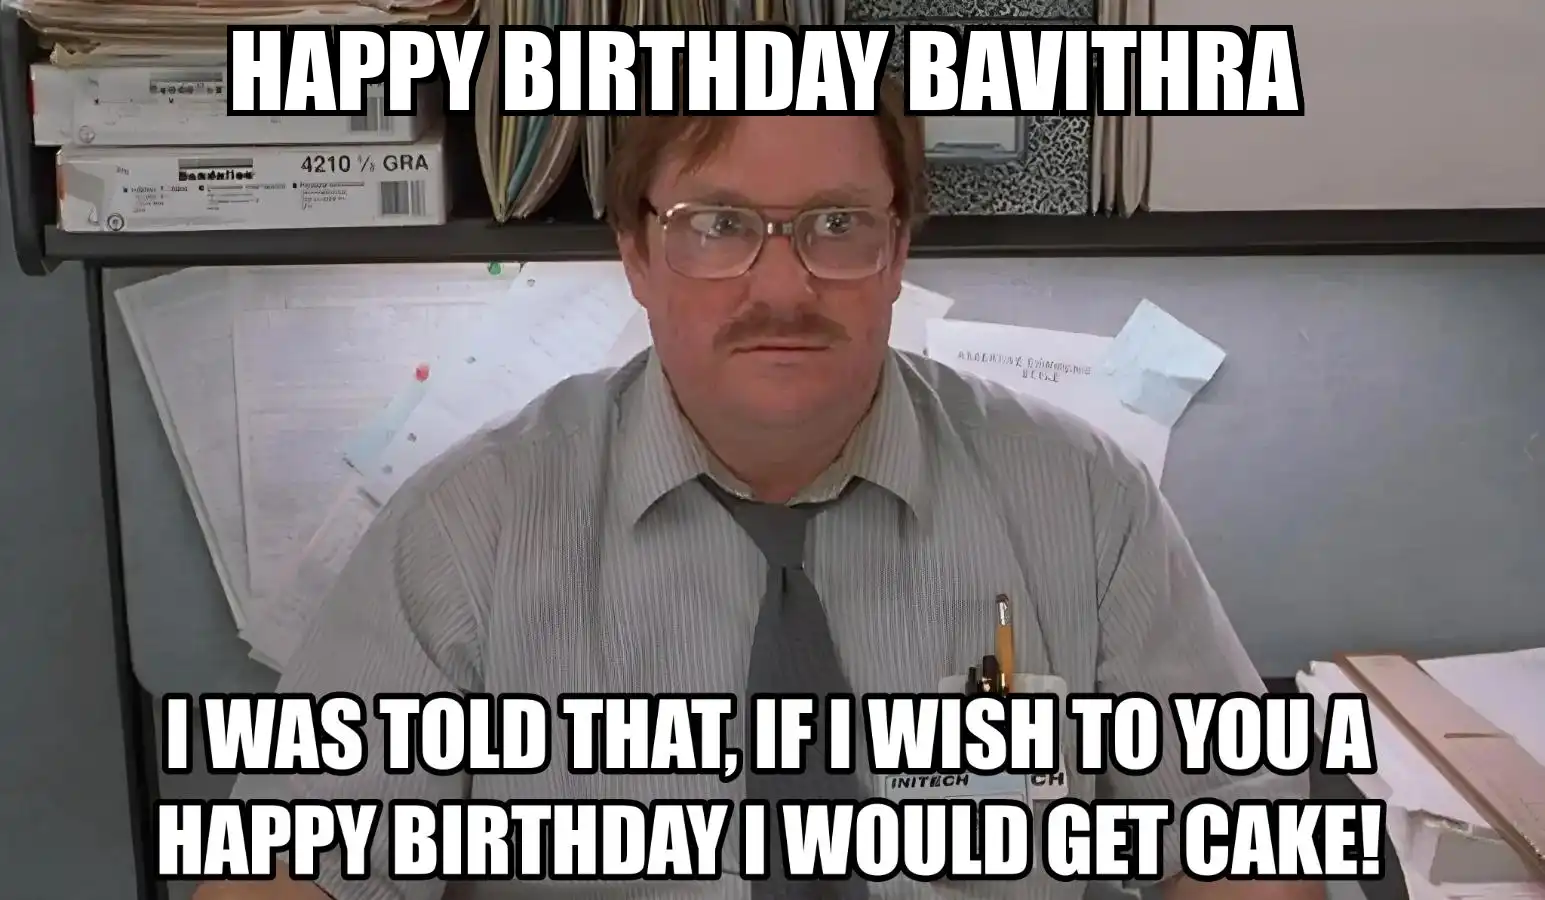 Happy Birthday Bavithra I Would Get A Cake Meme